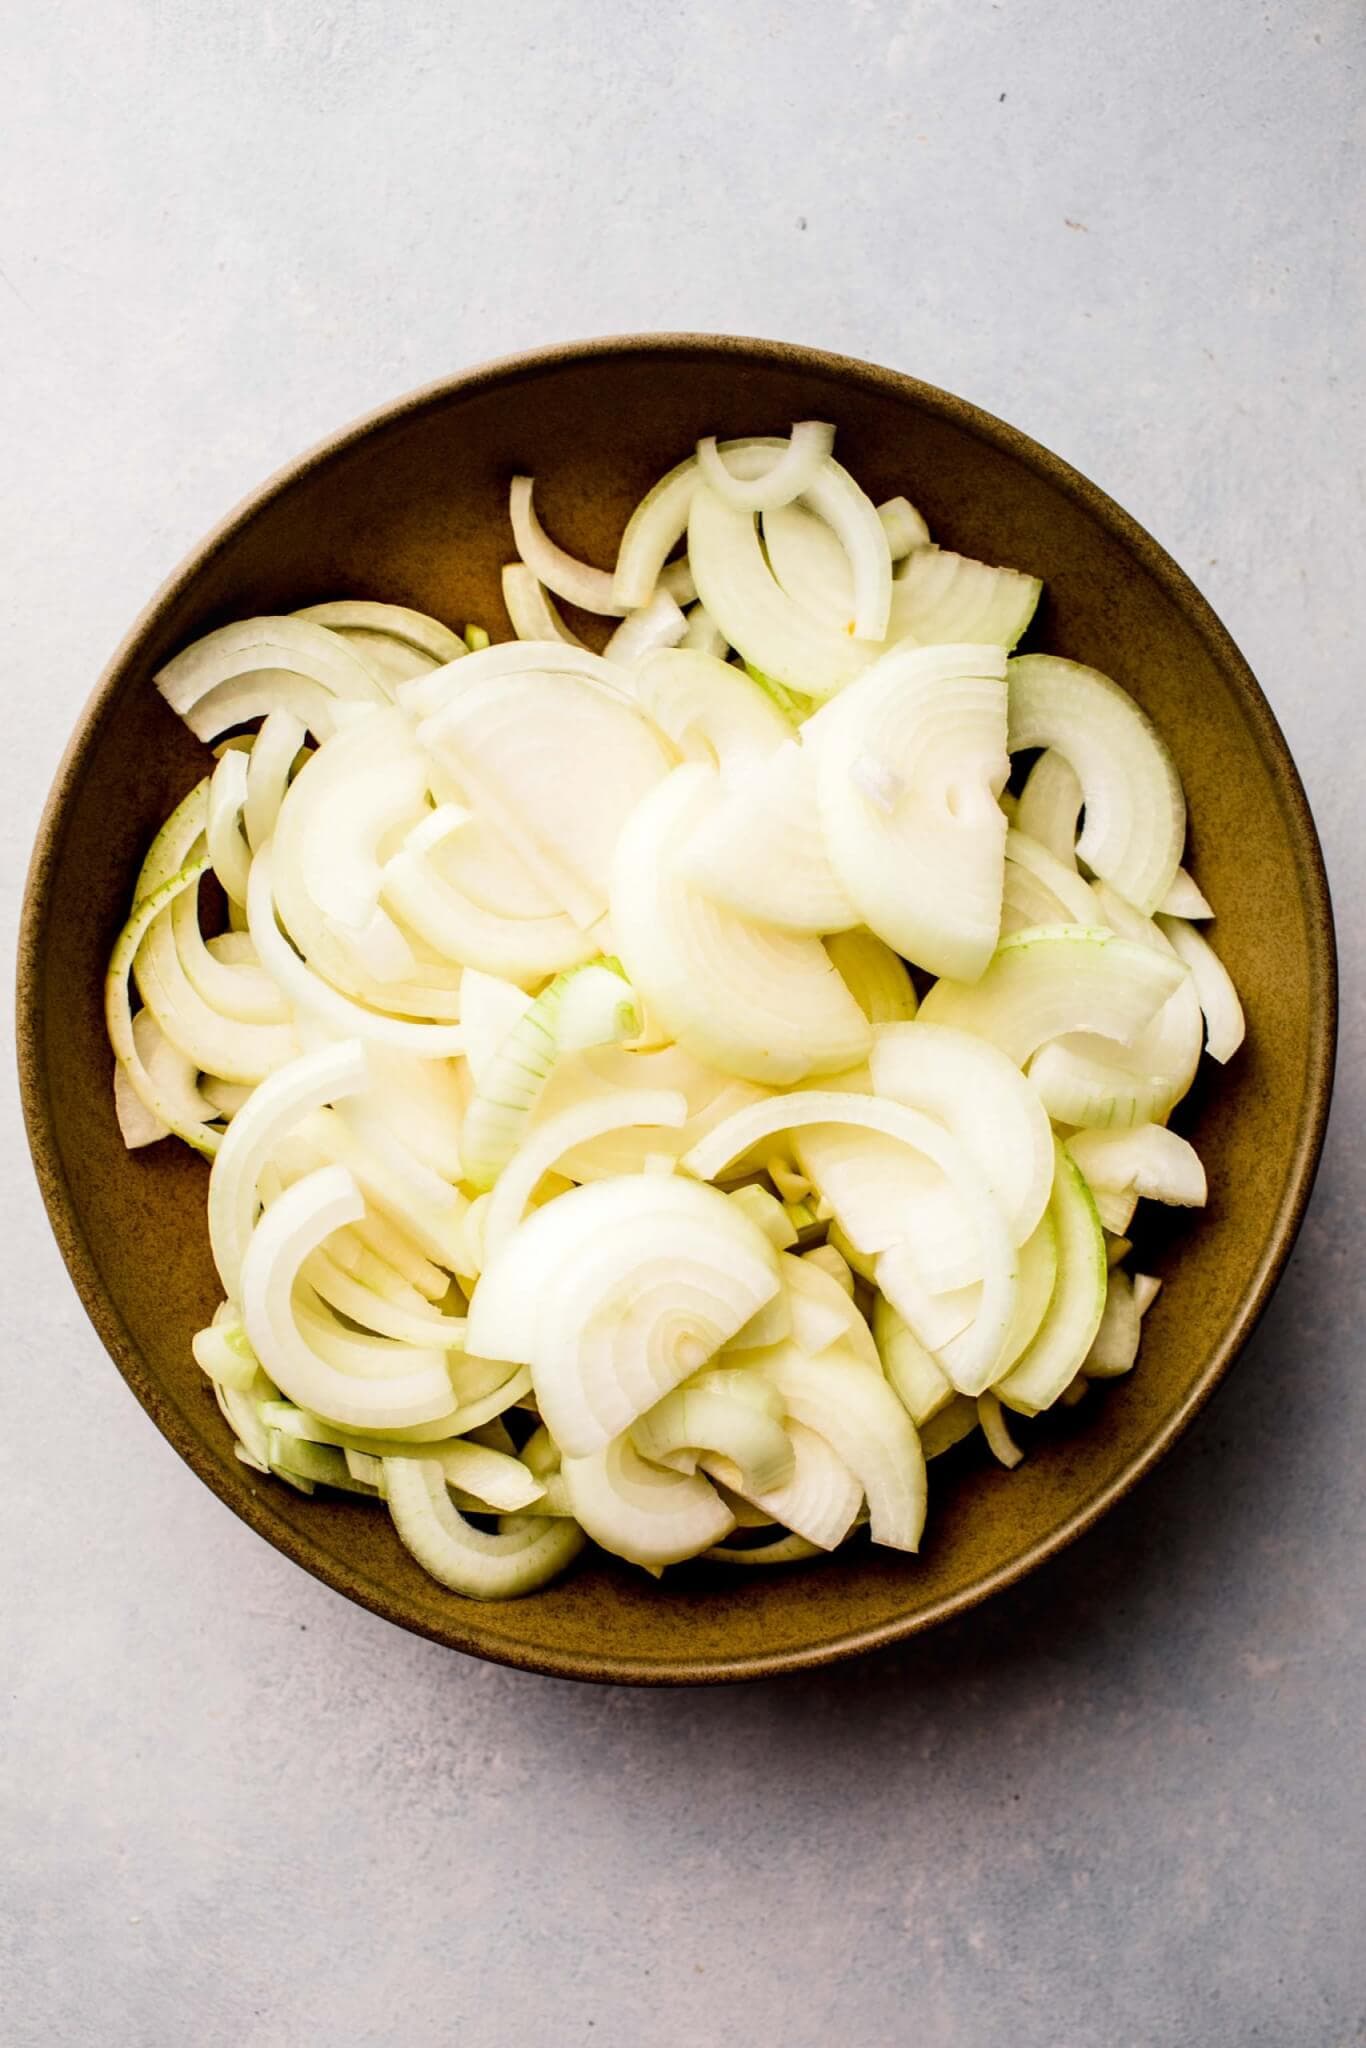 Raw onions sliced in bowl on counter